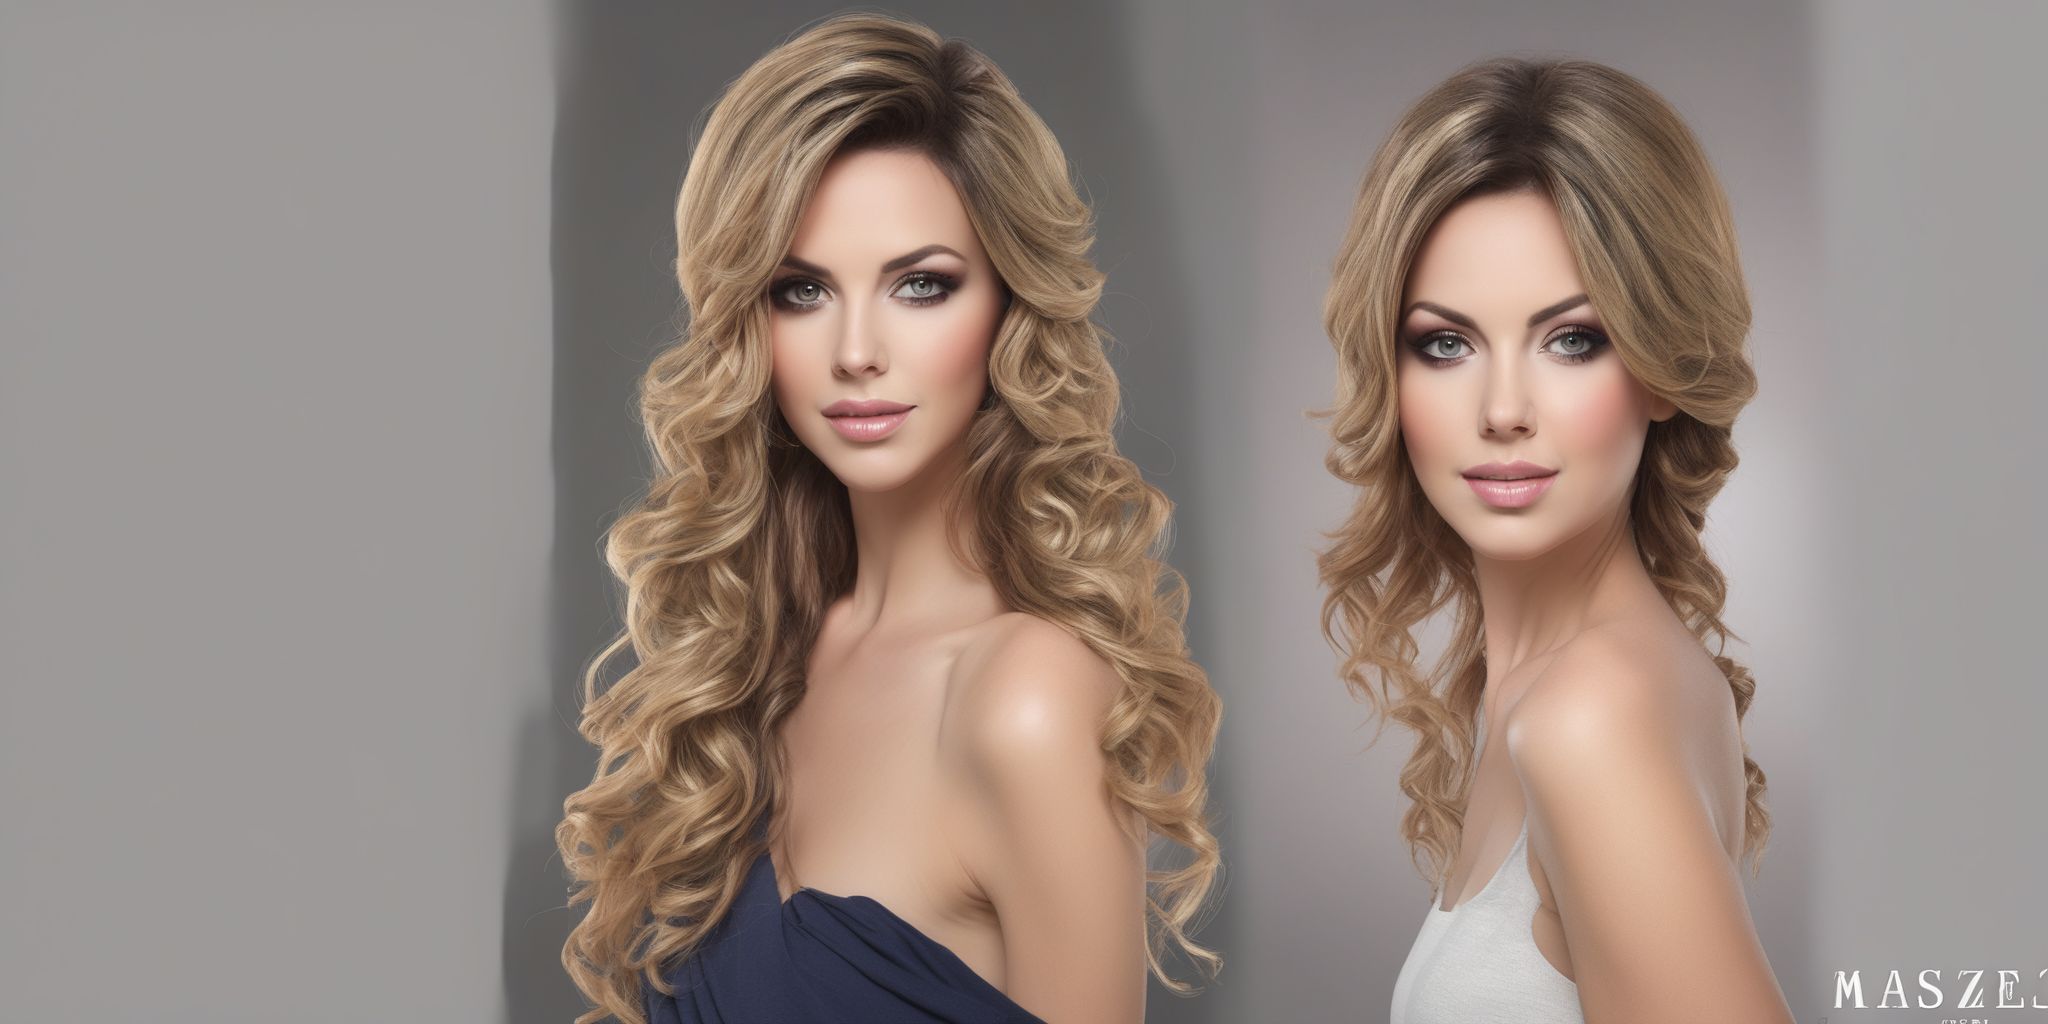 Makeover  in realistic, photographic style